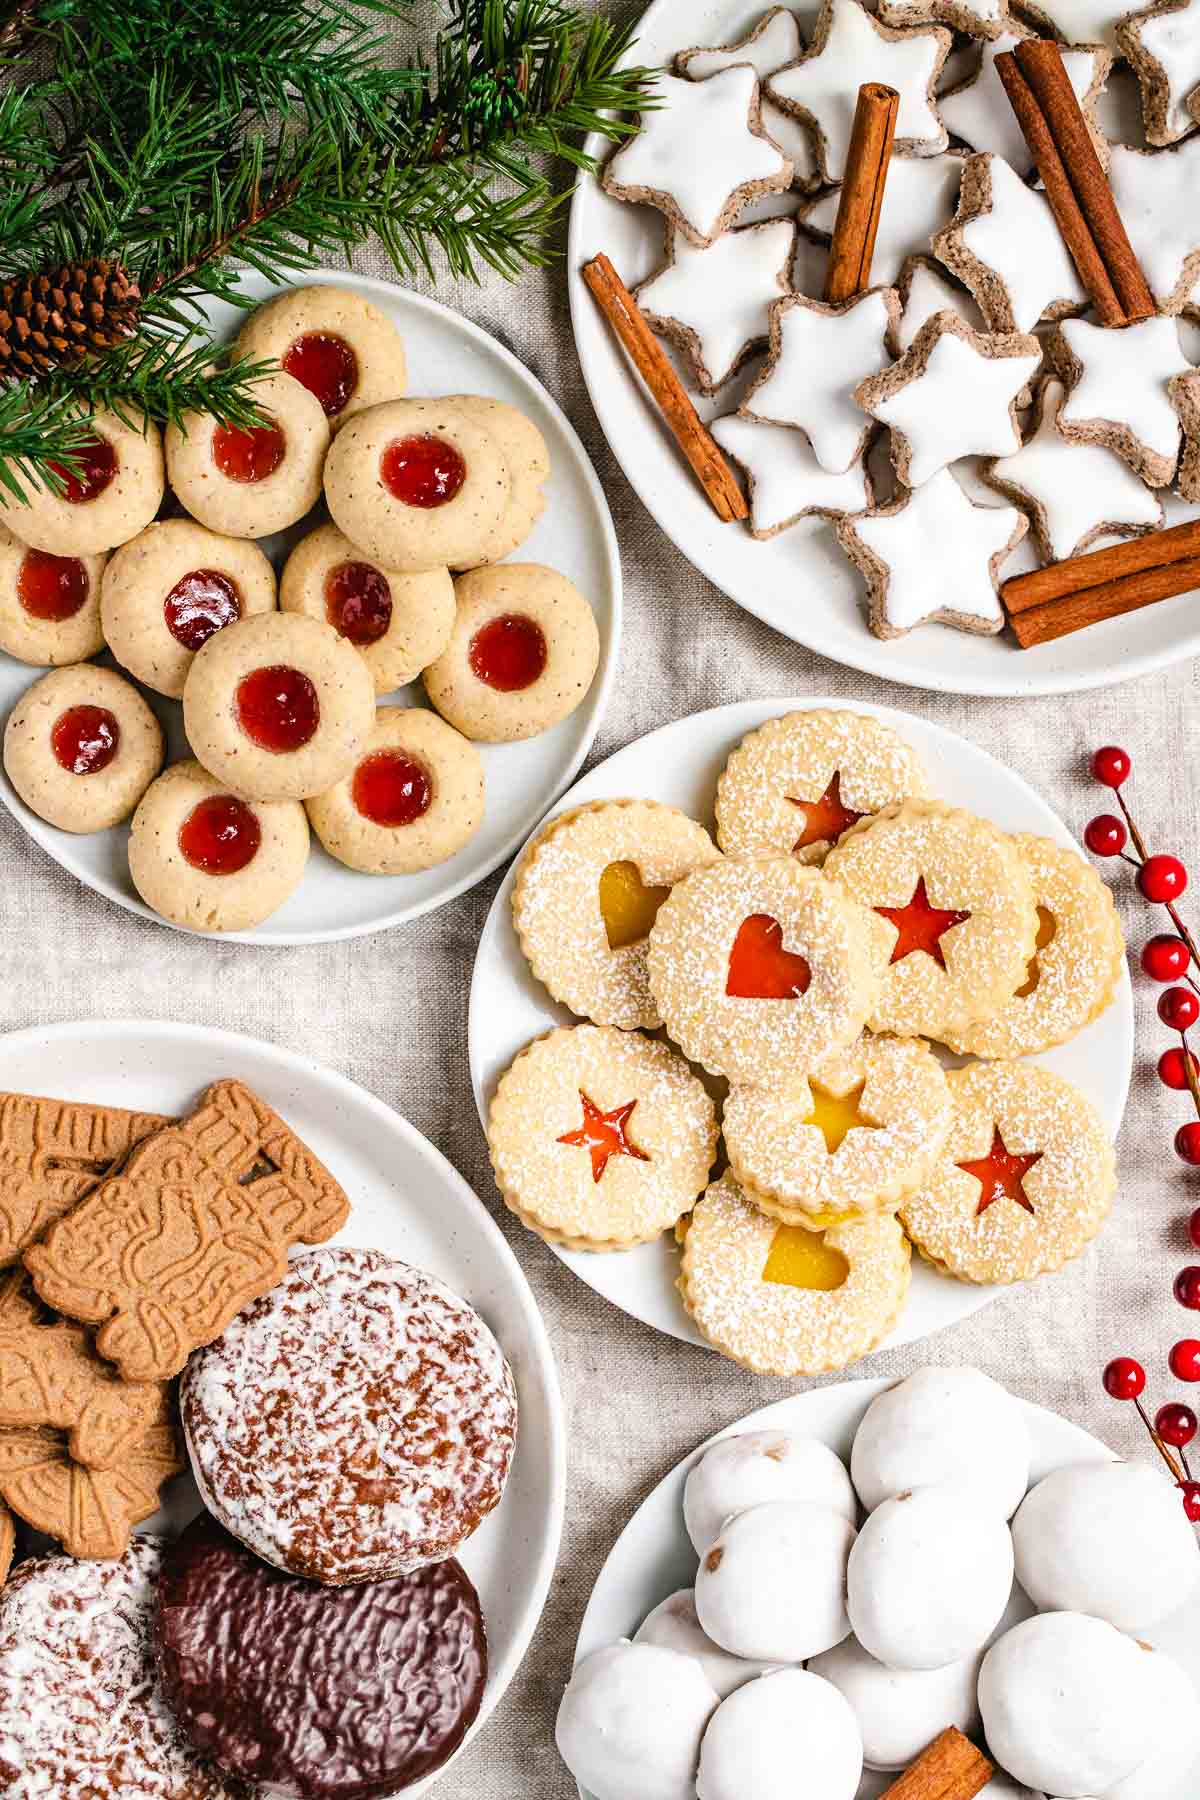 A collection of German Christmas cookies on various plates garnished with pine branches and red berries. There are Cinnamon stars, garnished with cinnamon sticks, thumbprint cookies with strawberry jam, linzer cookies with strawberry jam and lemon curd, Gingerbread and spekulatius cookies and Pfeffernuesse.